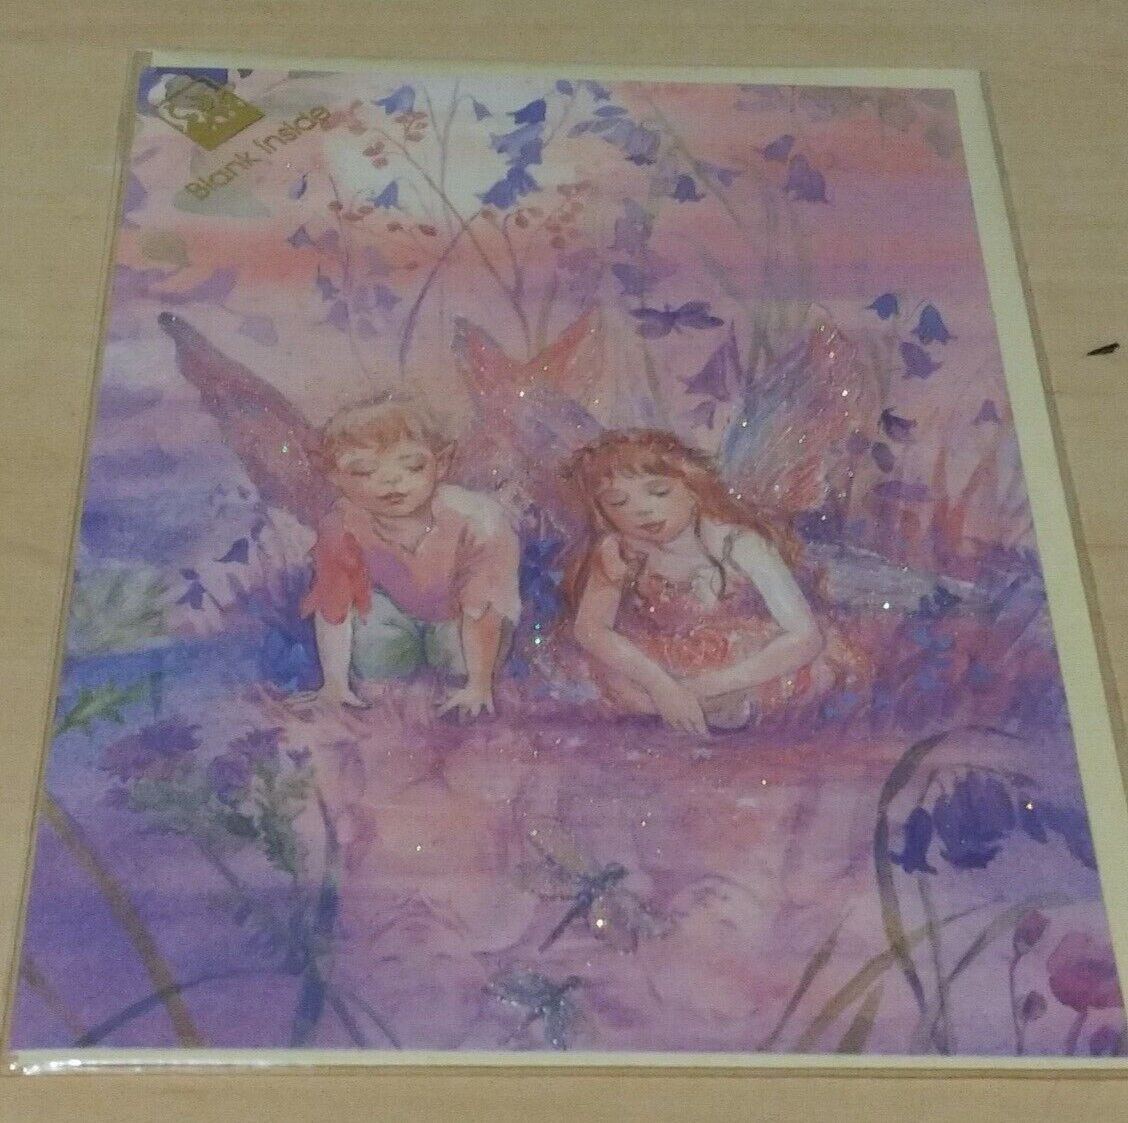 Beverly Manson-forest Fairies "reflections" Blank Greeting Card - Sealed